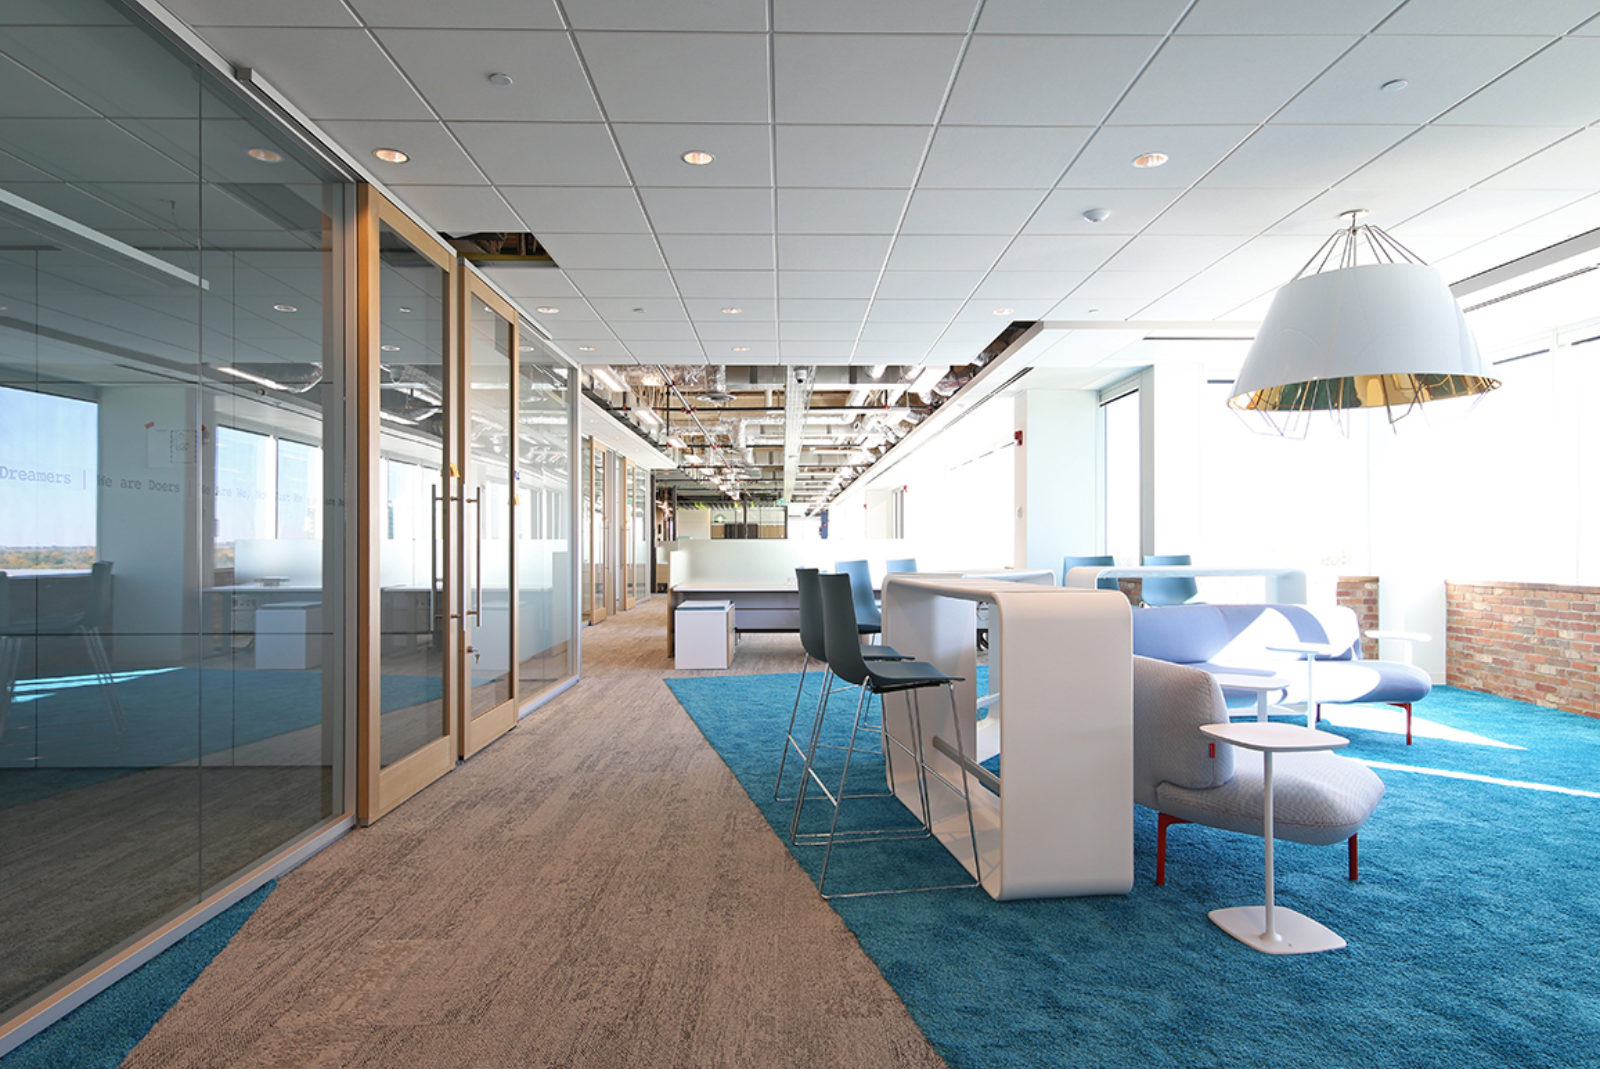 Bright space with DIRTT walls and doors along left side; a collection of lounge and collaborative furniture on right side of room, with a bright blue rug